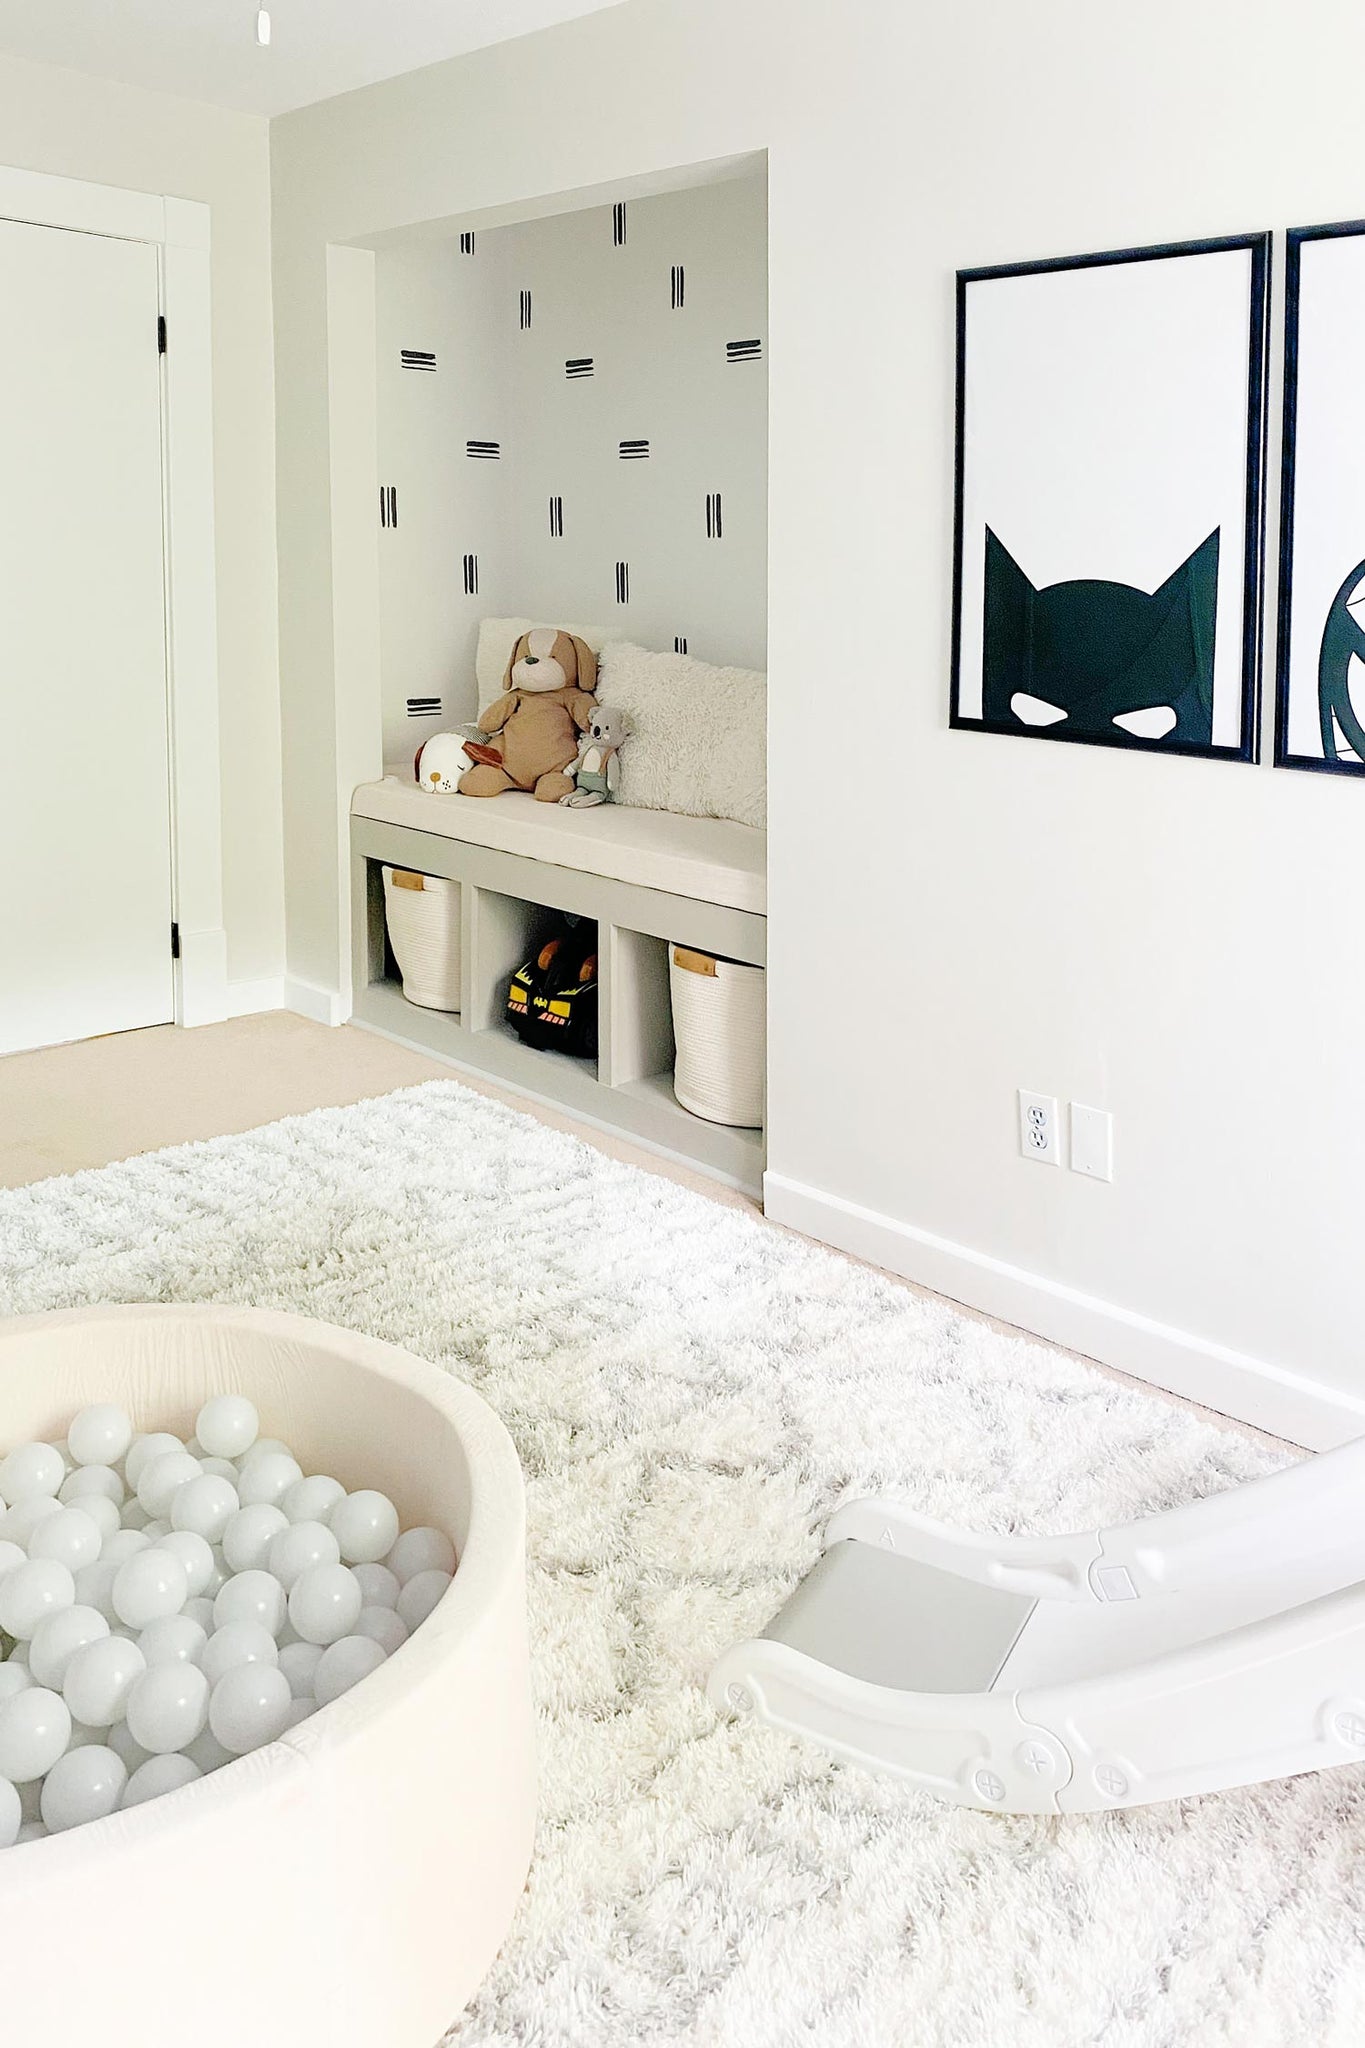 DIY traditional wallpaper project for the toddler playroom